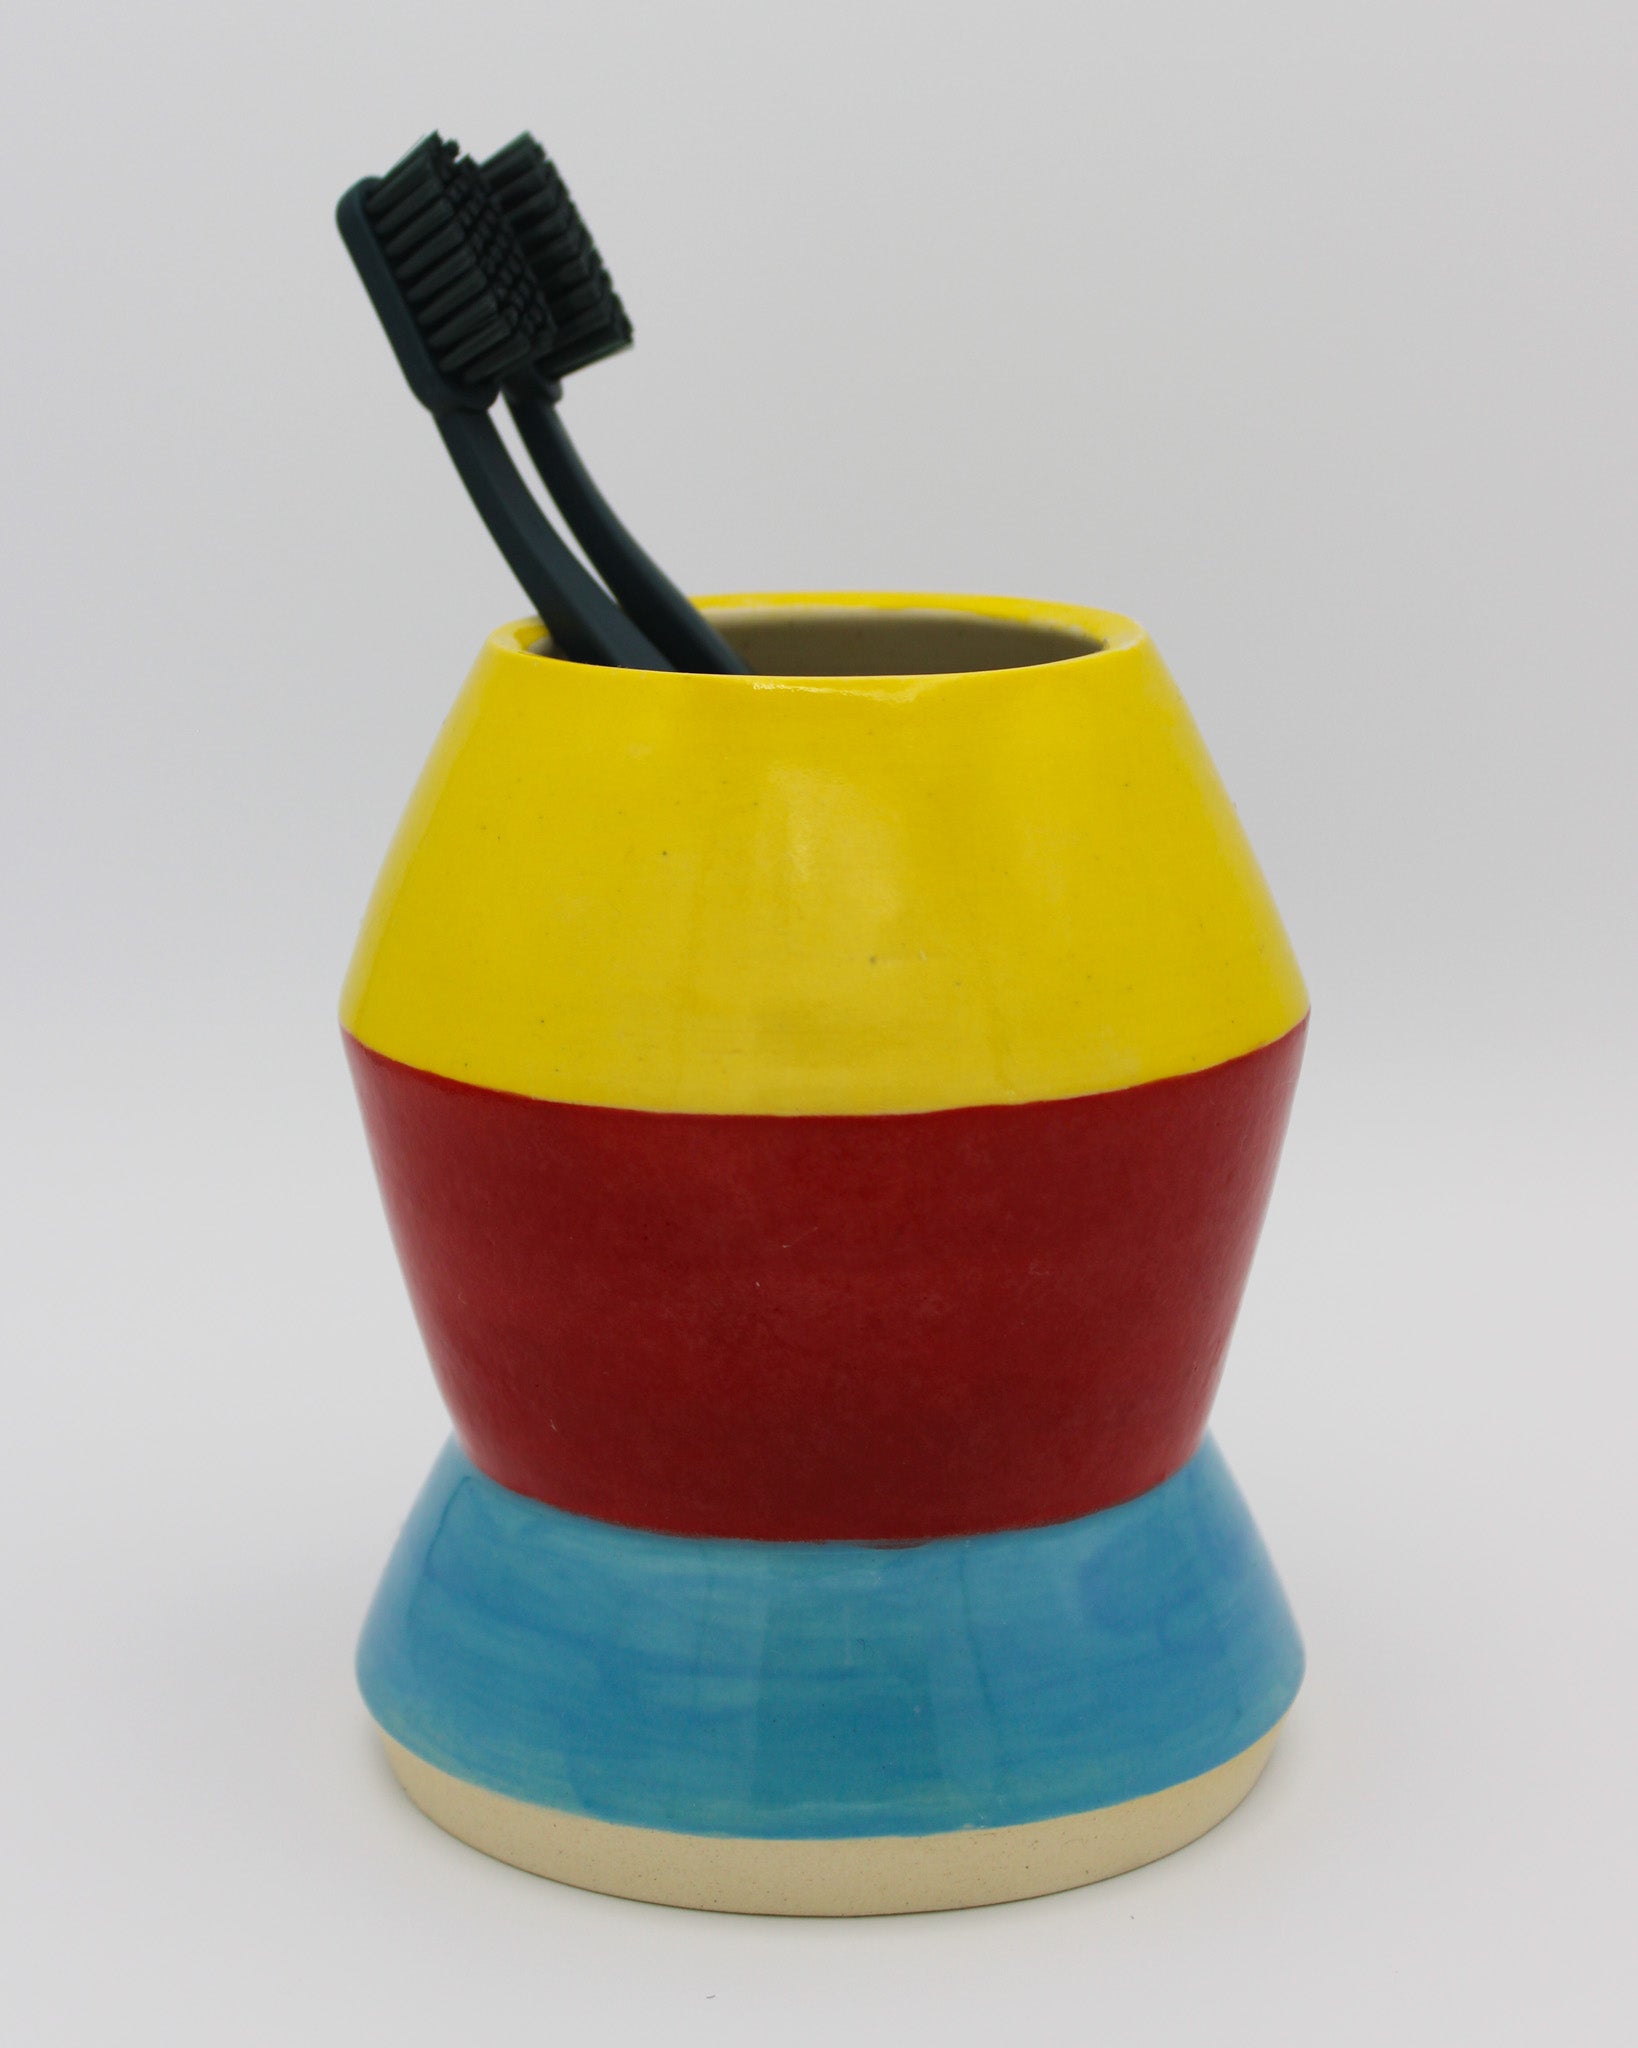 Primary Vase/Utility Cup